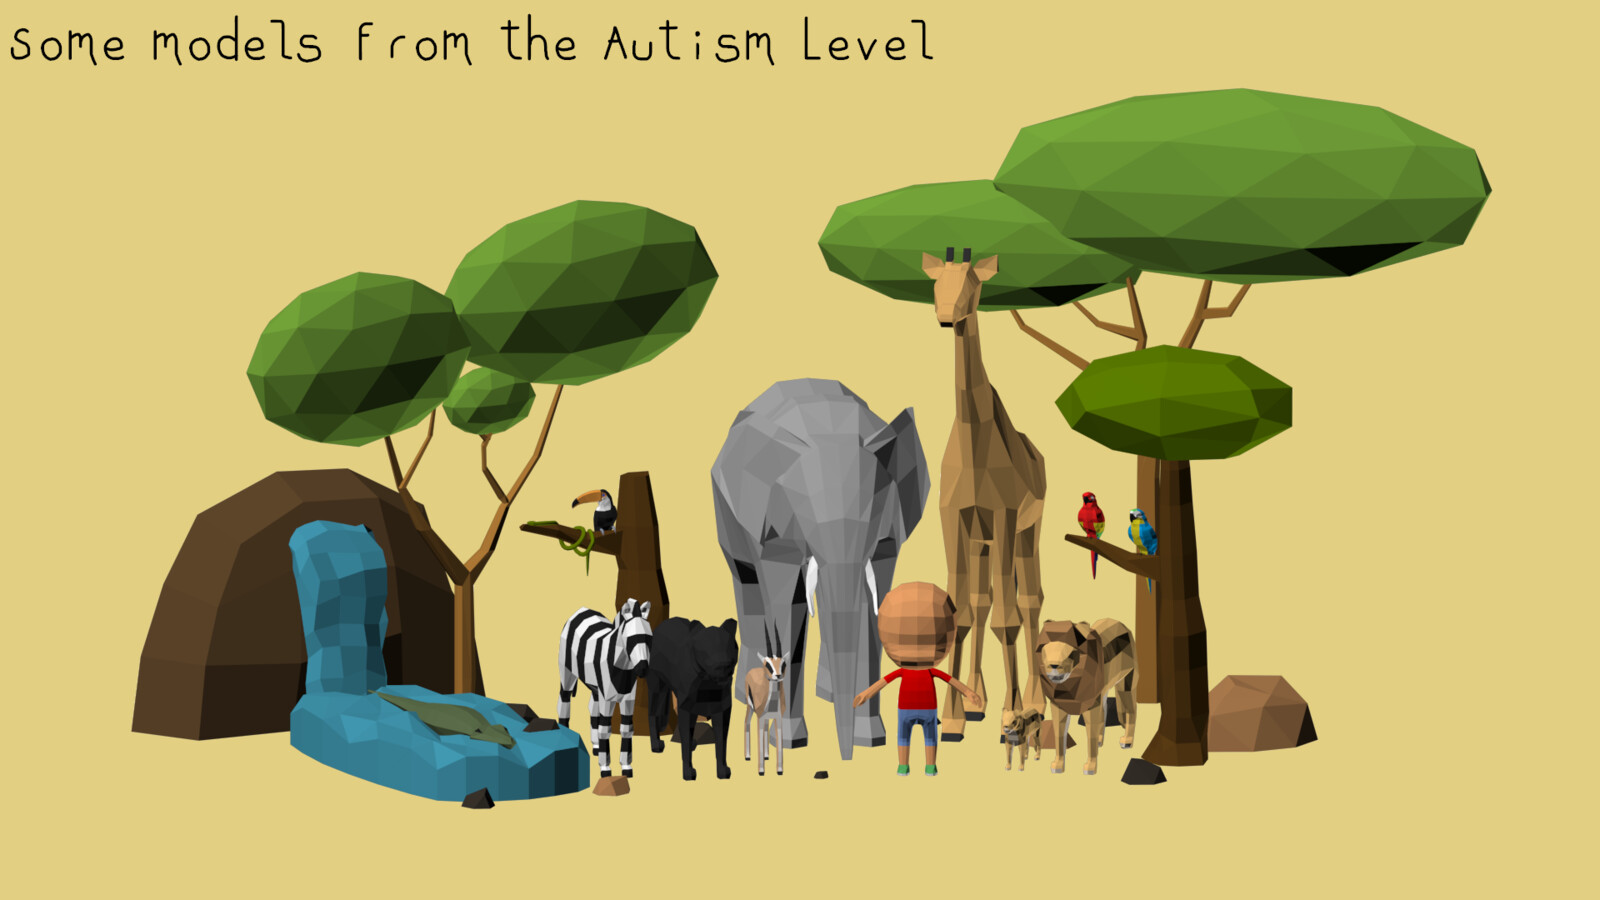 Some models from Autism Level